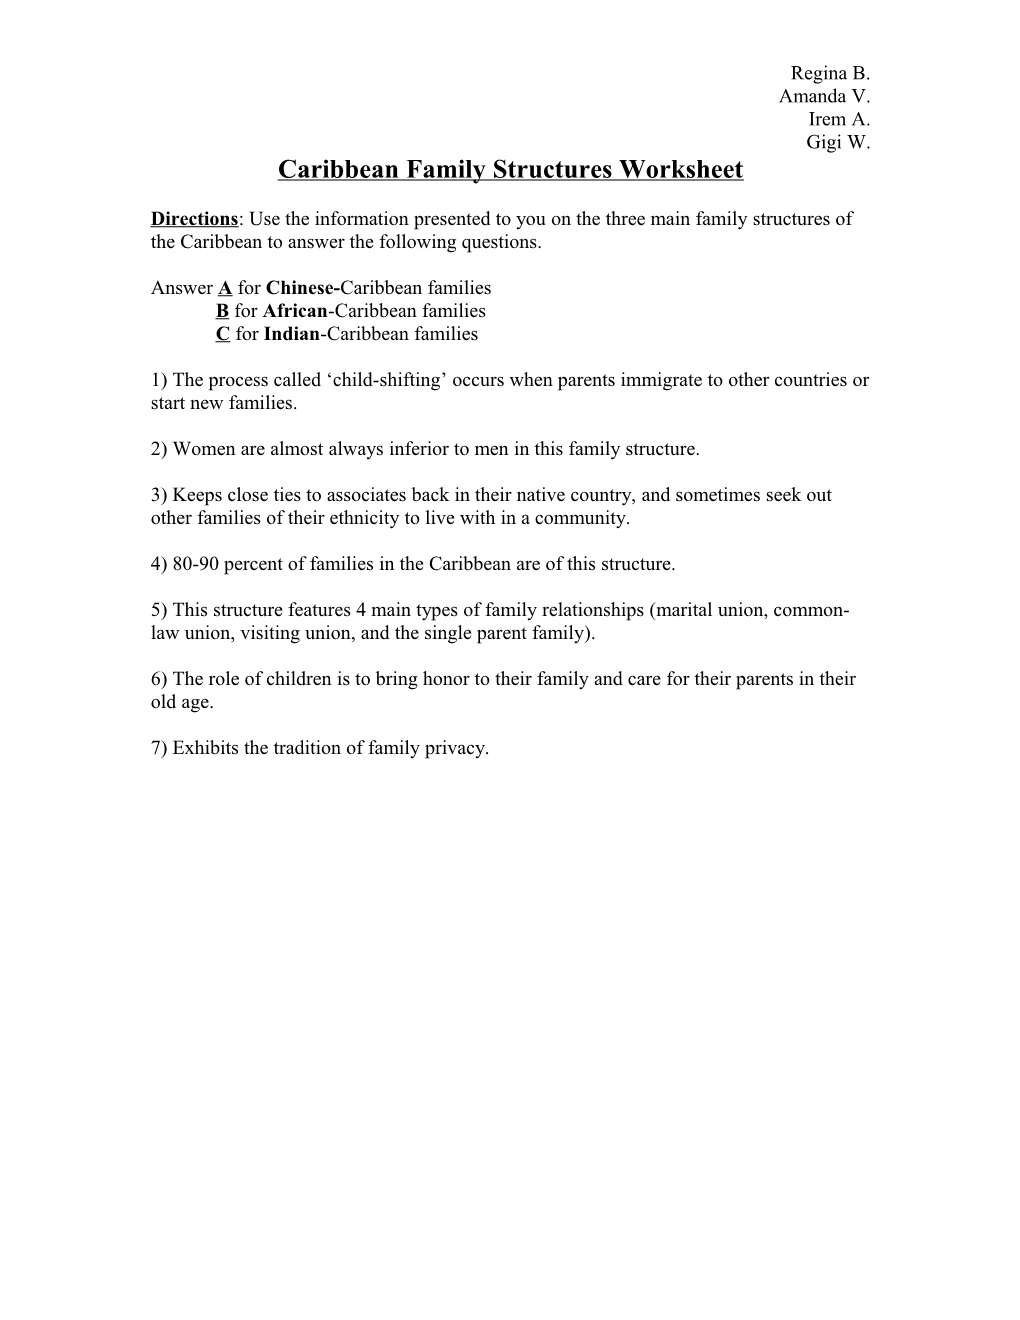 Caribbean Family Structures Worksheet